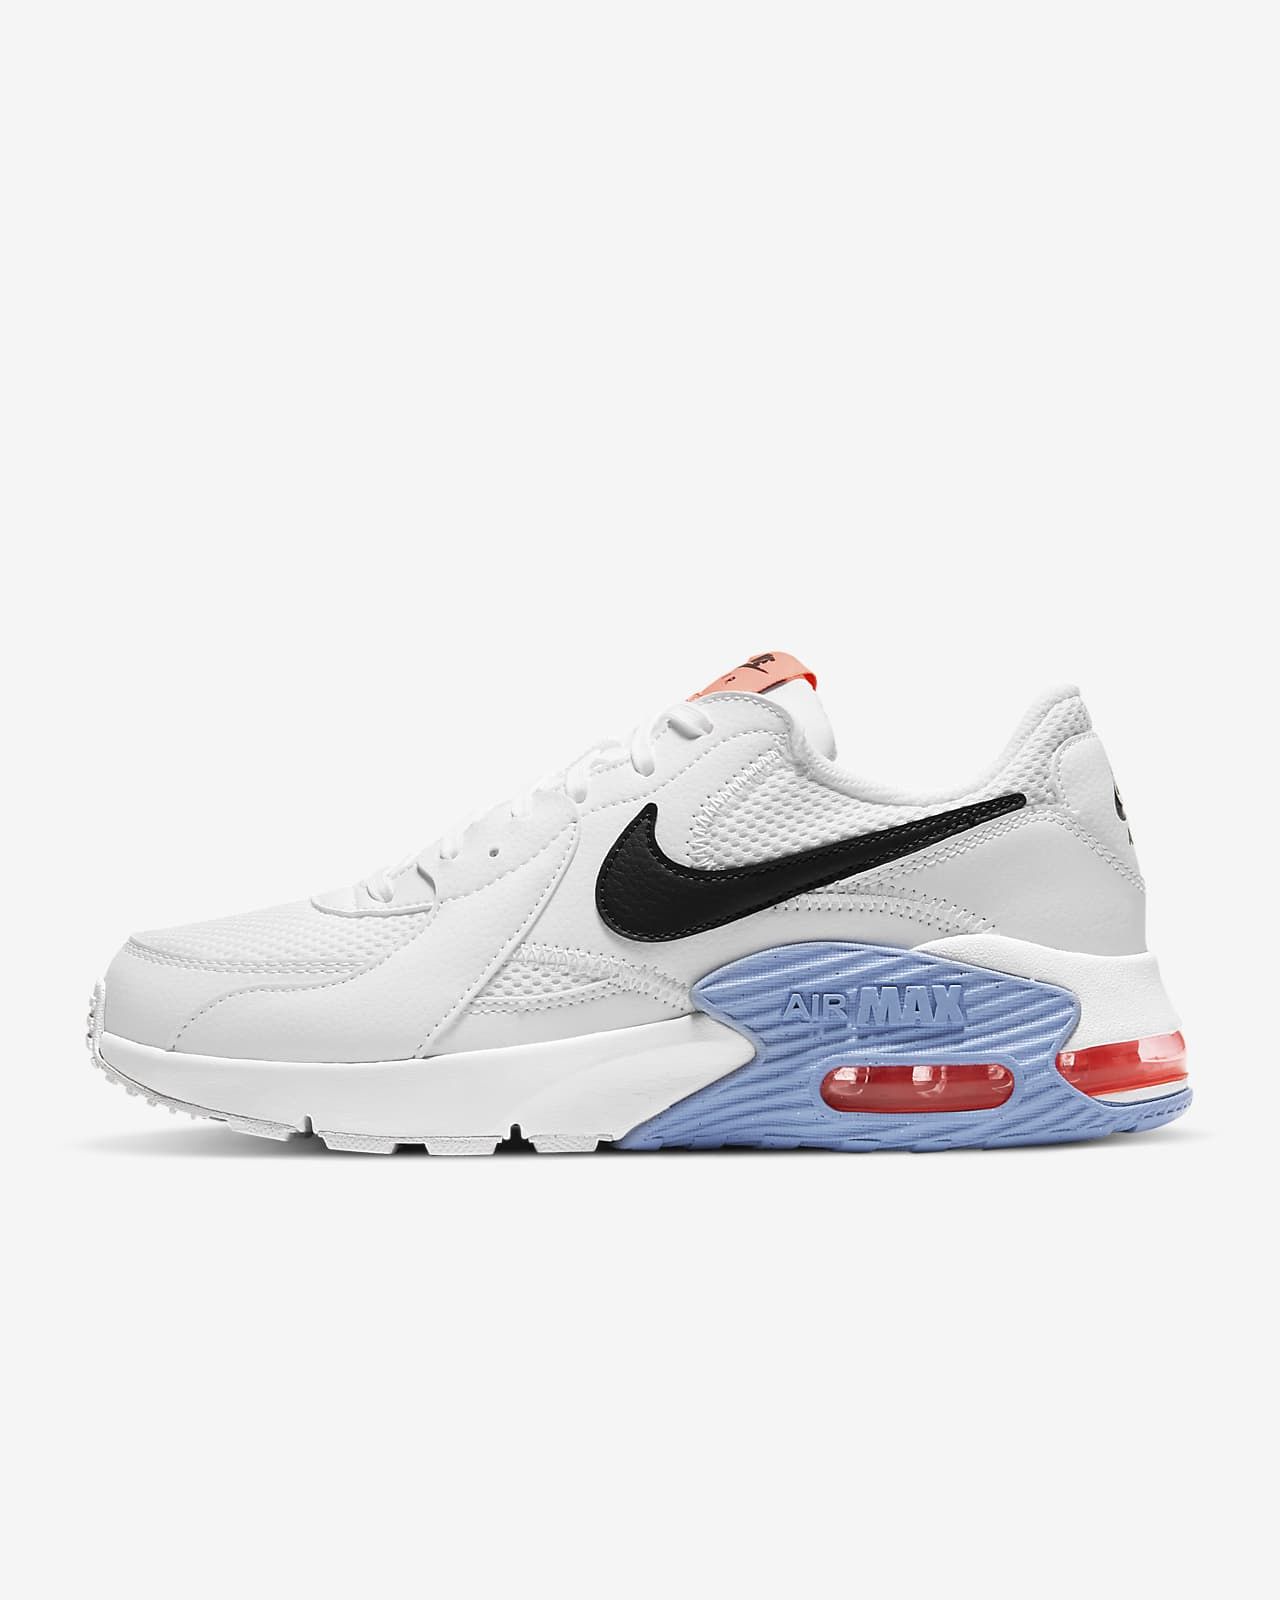 Women's ShoeNike Air Max Excee16% off | Nike (US)